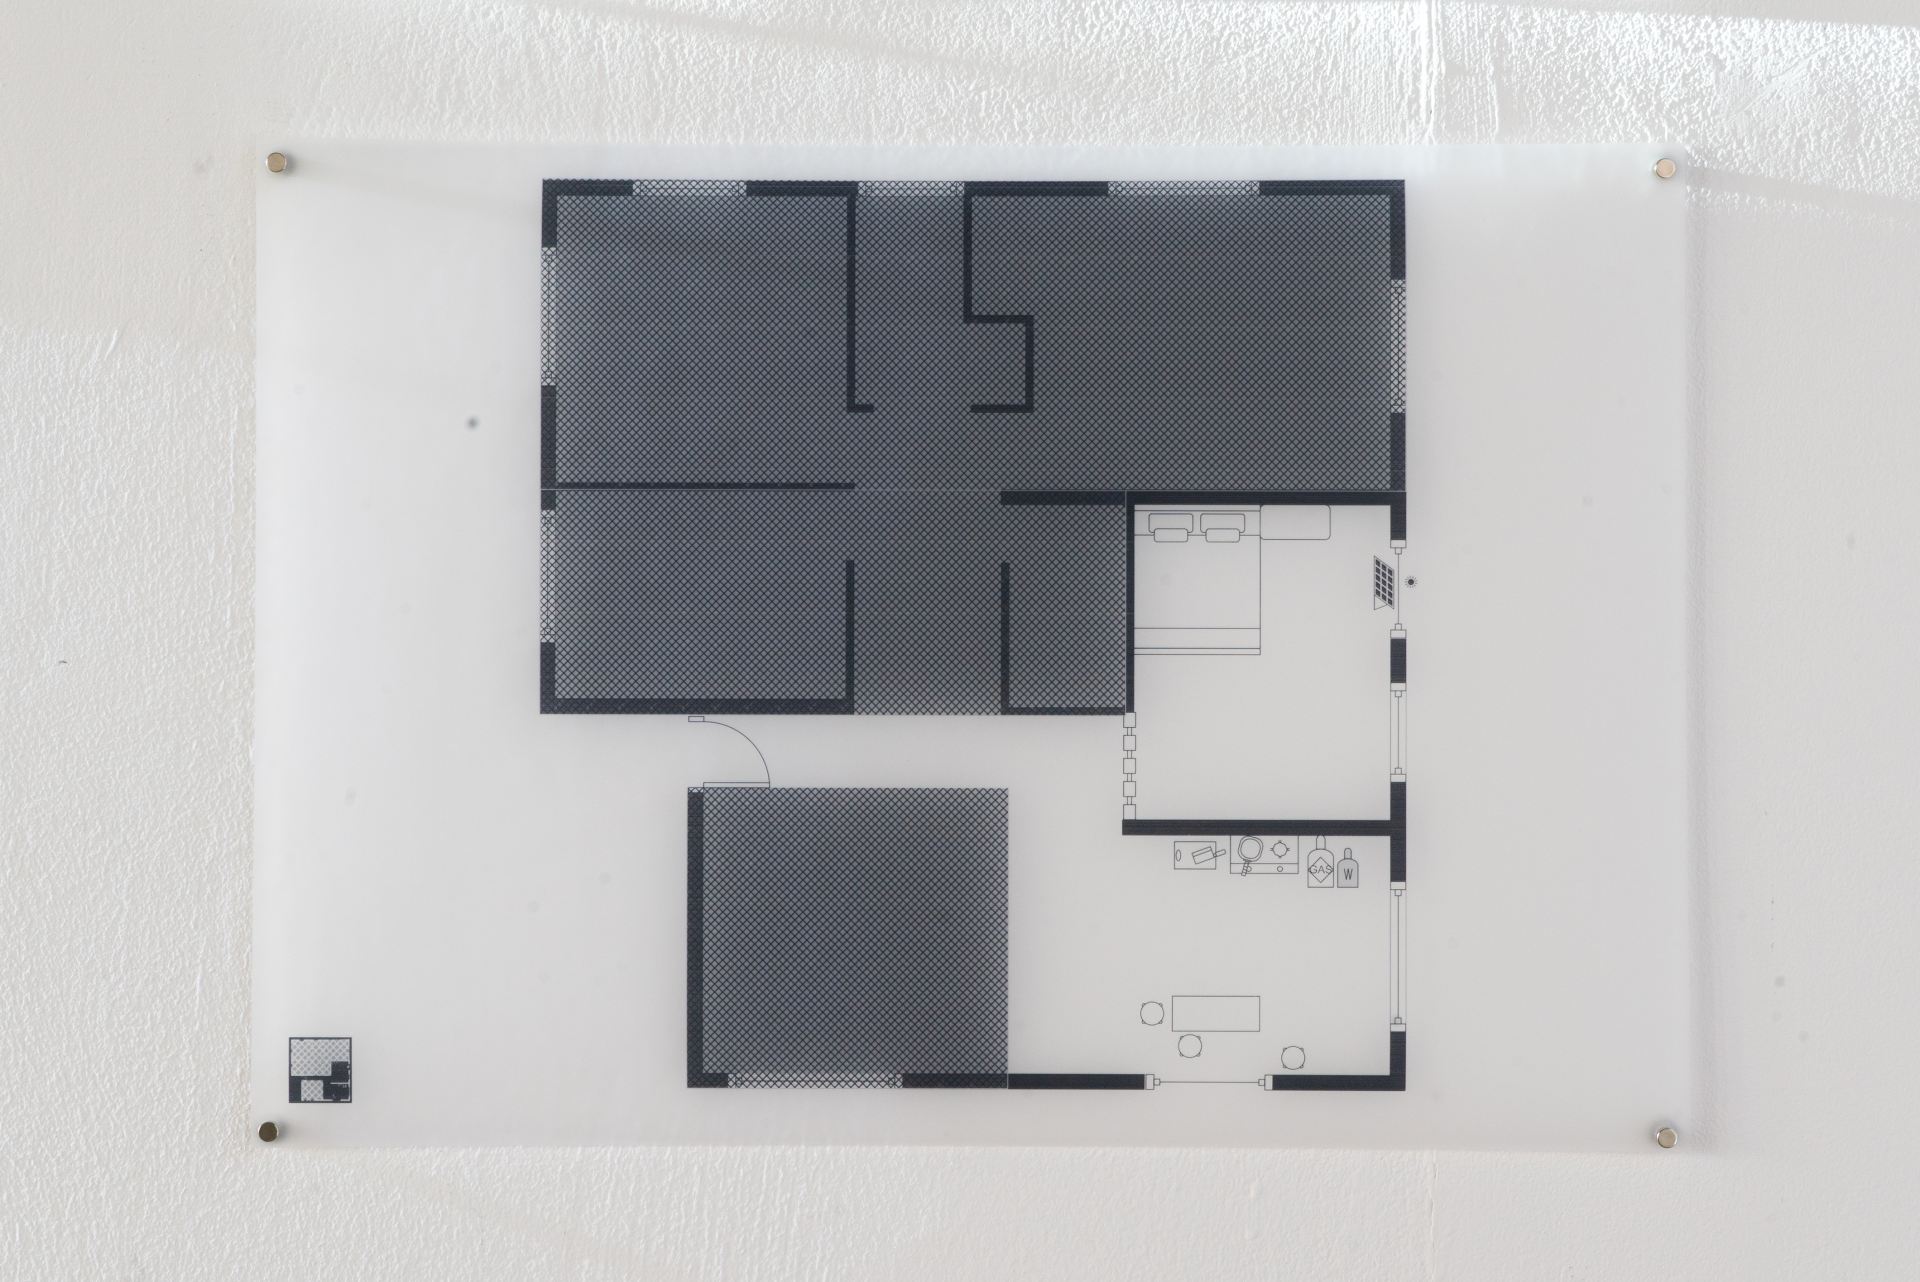 An image of a floor plan.